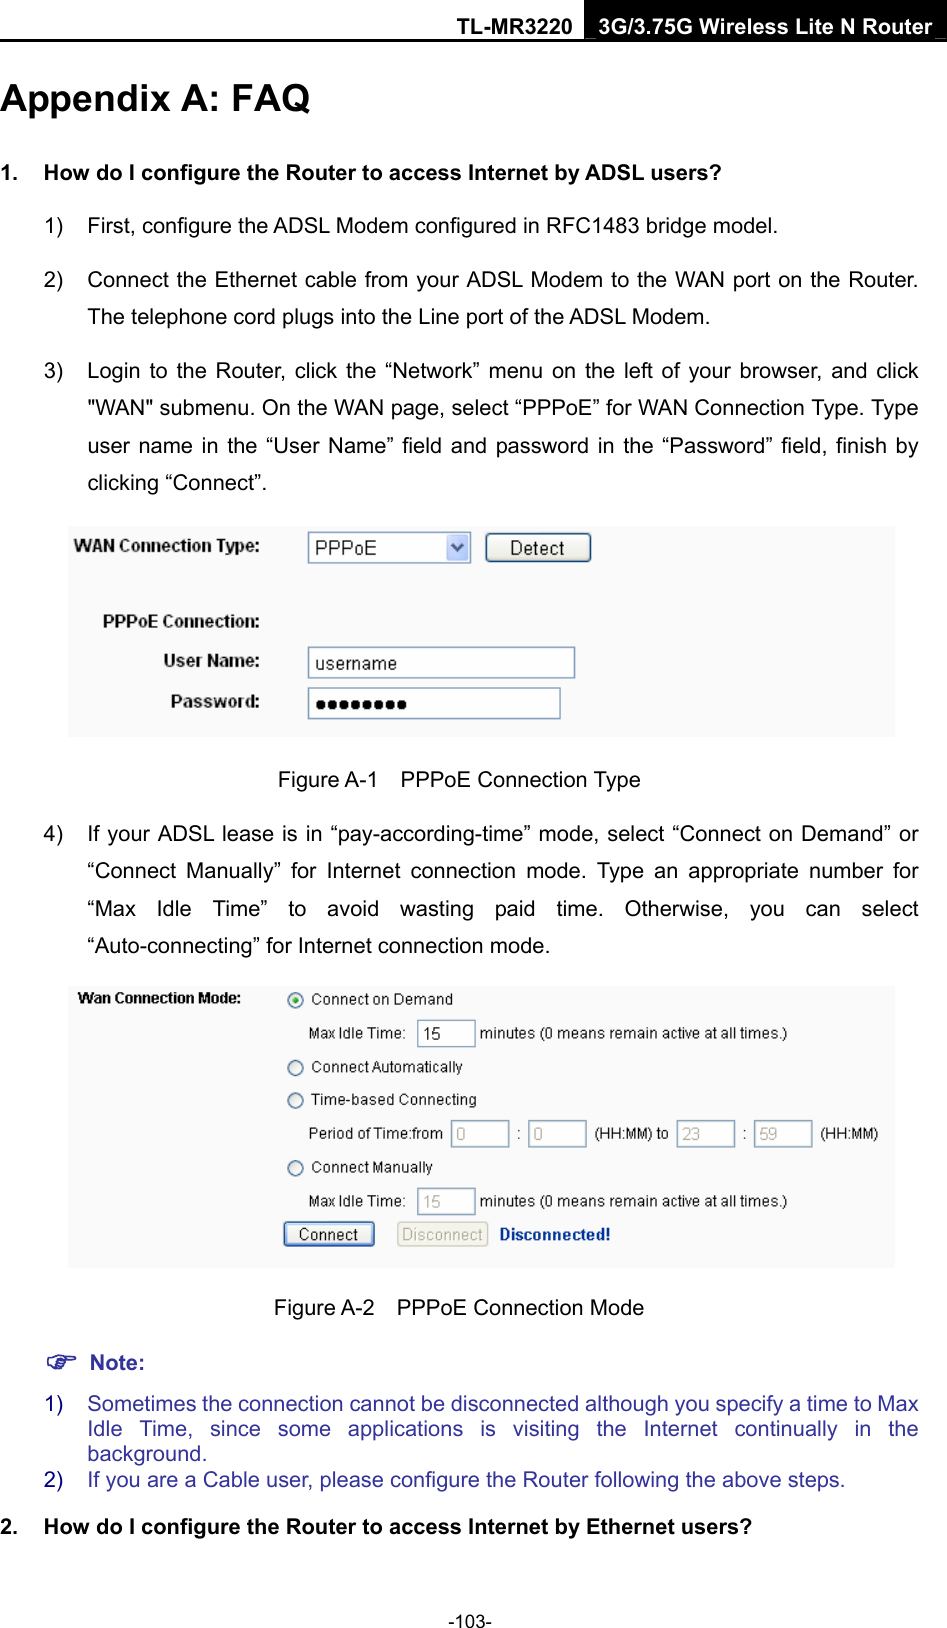 TL-MR3220 3G/3.75G Wireless Lite N Router -103- Appendix A: FAQ 1.  How do I configure the Router to access Internet by ADSL users? 1)  First, configure the ADSL Modem configured in RFC1483 bridge model. 2)  Connect the Ethernet cable from your ADSL Modem to the WAN port on the Router. The telephone cord plugs into the Line port of the ADSL Modem. 3)  Login to the Router, click the “Network” menu on the left of your browser, and click &quot;WAN&quot; submenu. On the WAN page, select “PPPoE” for WAN Connection Type. Type user name in the “User Name” field and password in the “Password” field, finish by clicking “Connect”.  Figure A-1  PPPoE Connection Type 4)  If your ADSL lease is in “pay-according-time” mode, select “Connect on Demand” or “Connect Manually” for Internet connection mode. Type an appropriate number for “Max Idle Time” to avoid wasting paid time. Otherwise, you can select “Auto-connecting” for Internet connection mode.  Figure A-2  PPPoE Connection Mode ) Note: 1)  Sometimes the connection cannot be disconnected although you specify a time to Max Idle Time, since some applications is visiting the Internet continually in the background. 2)  If you are a Cable user, please configure the Router following the above steps. 2.  How do I configure the Router to access Internet by Ethernet users? 